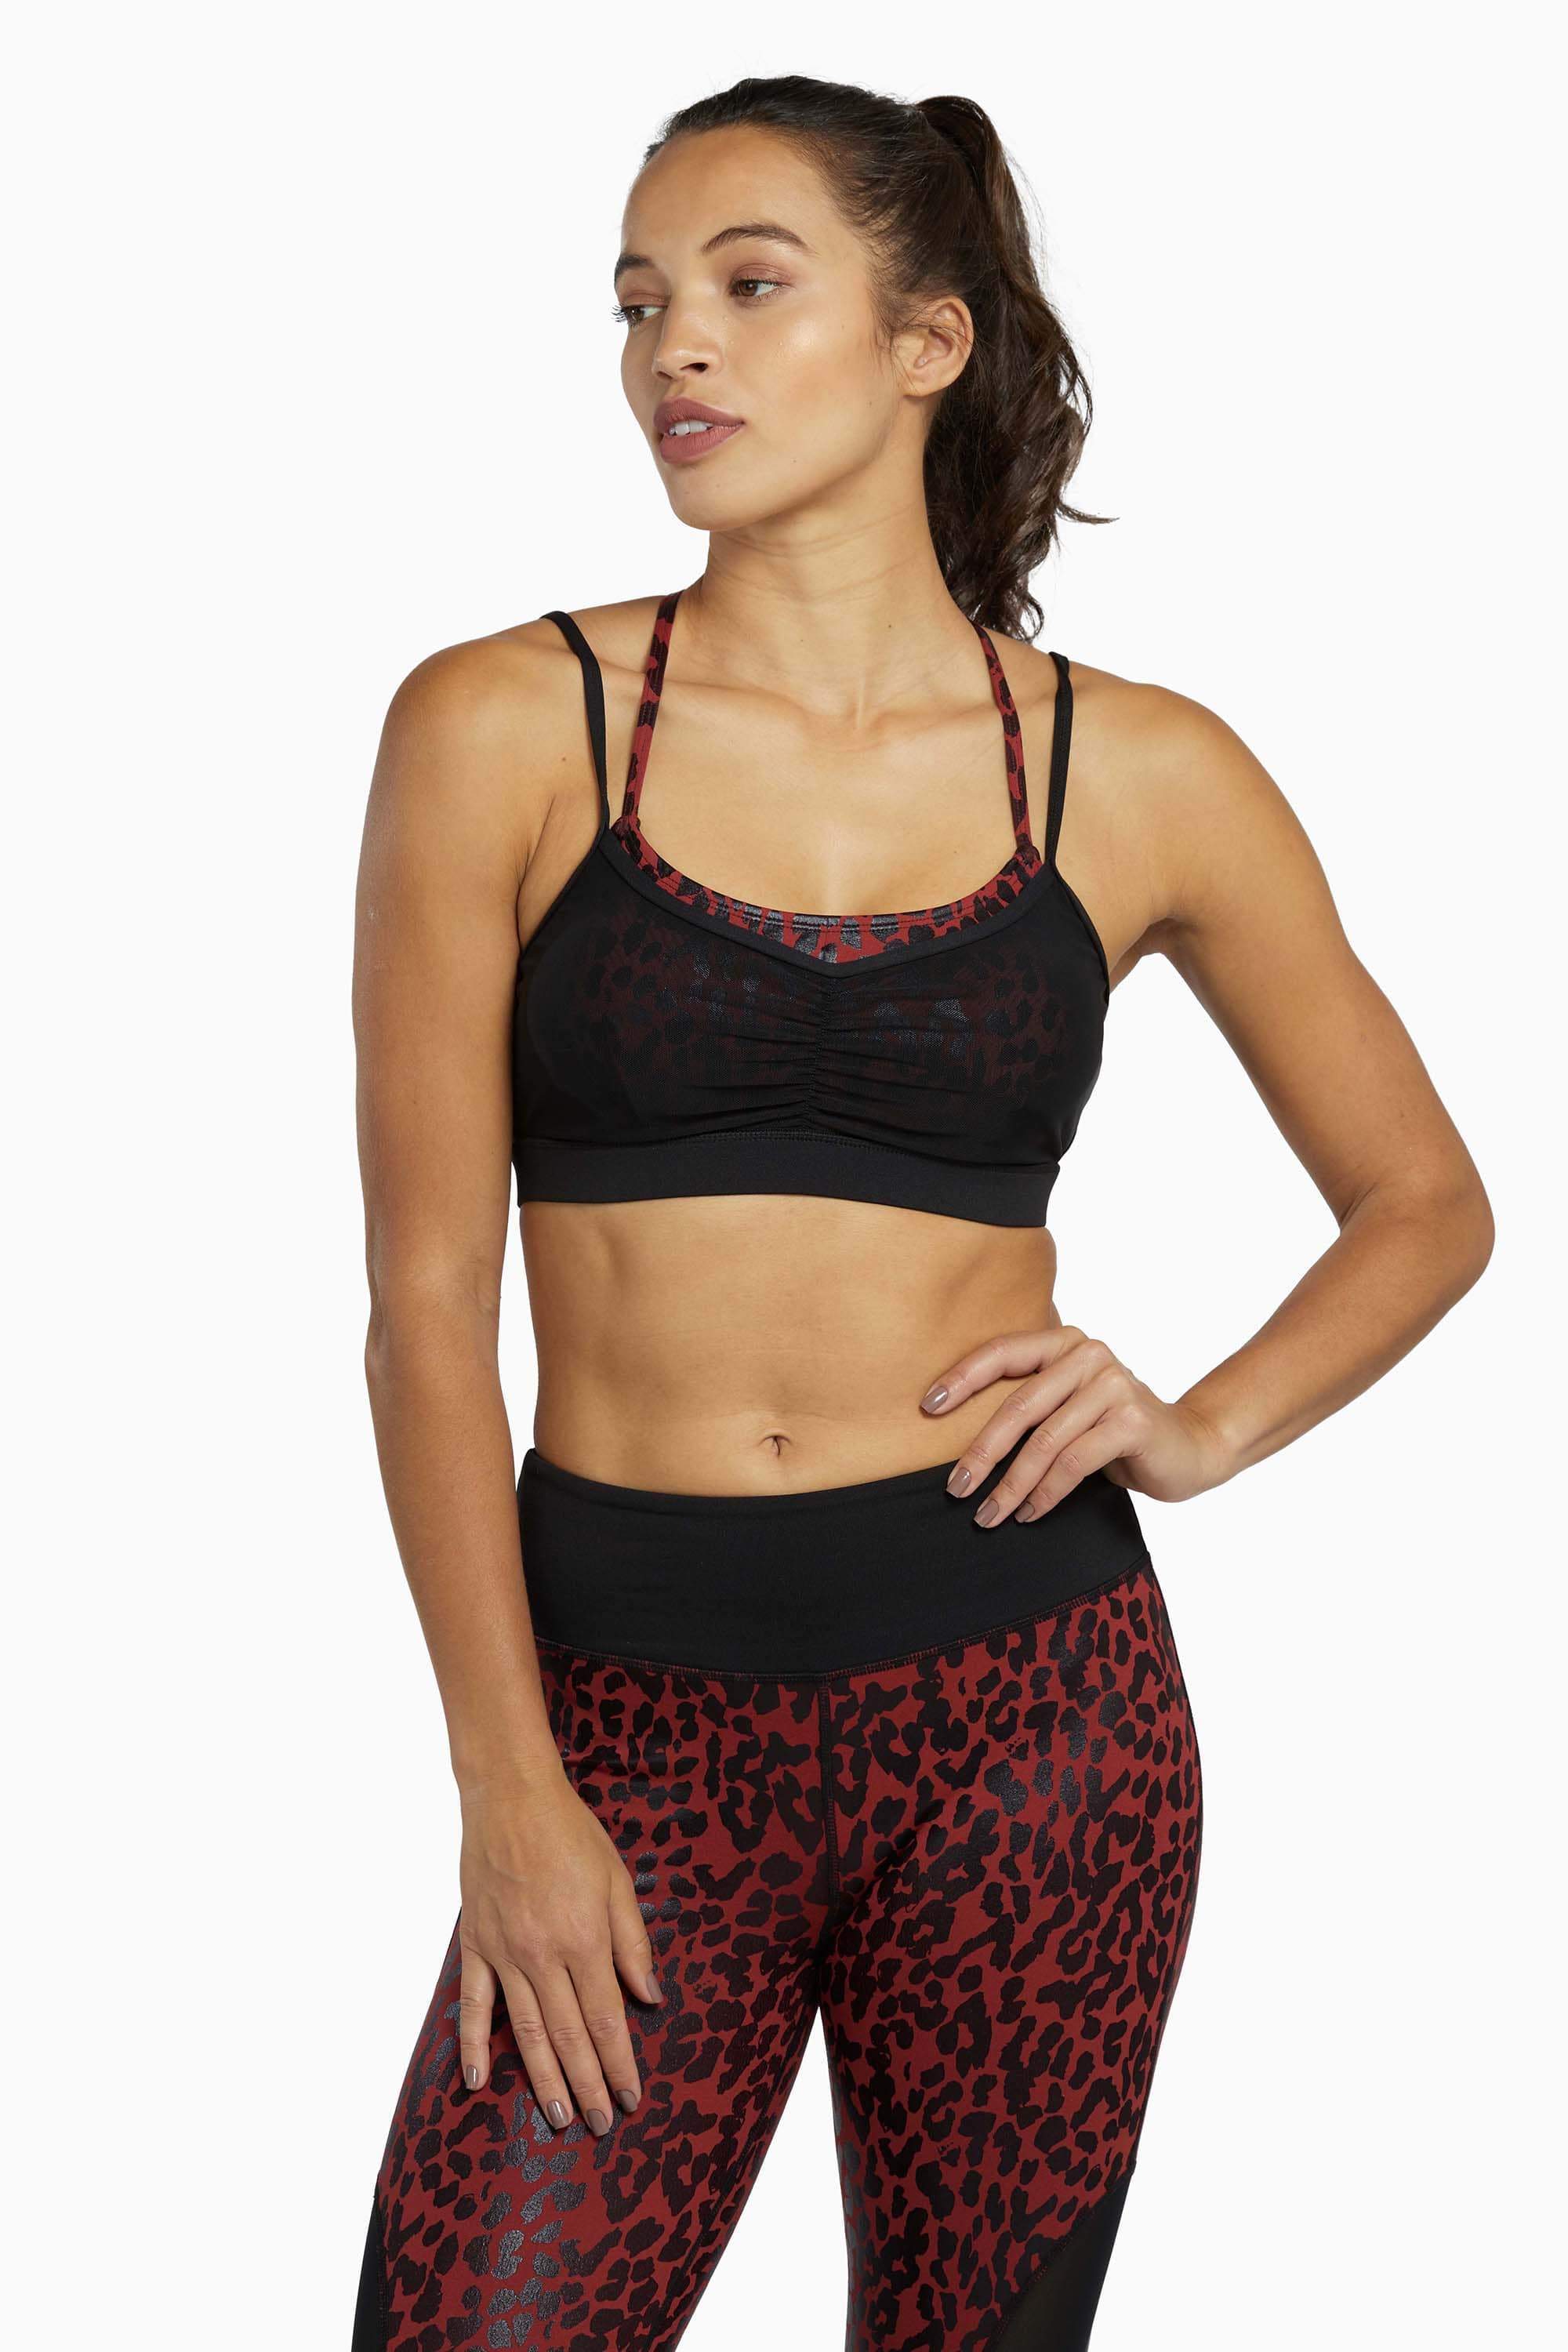 Wolf & Whistle Red and Black Leopard Wet look Sport Bra UK 10 / US 6